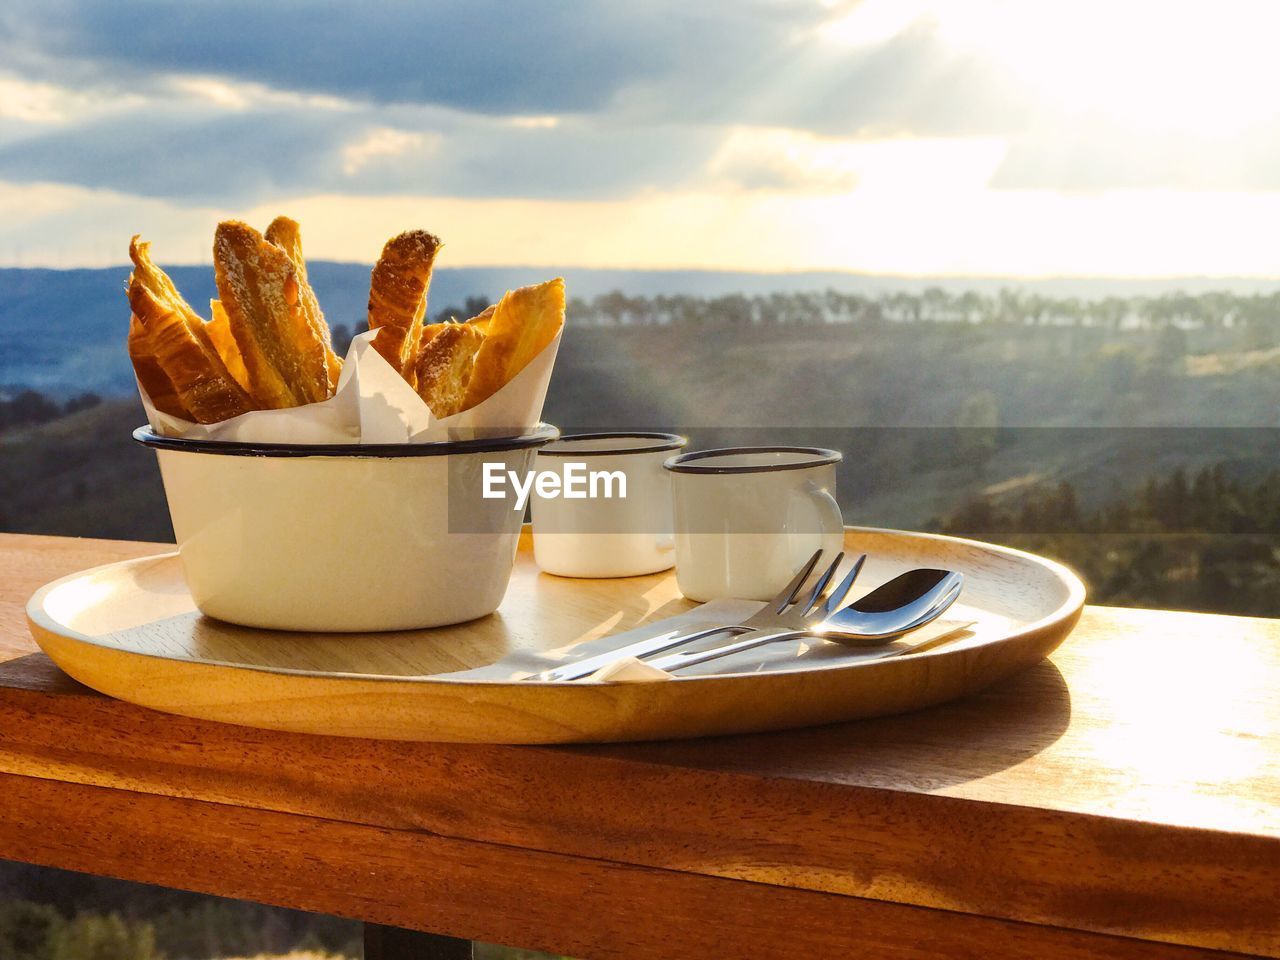 CLOSE-UP OF BREAD IN PLATE ON TABLE AGAINST SKY